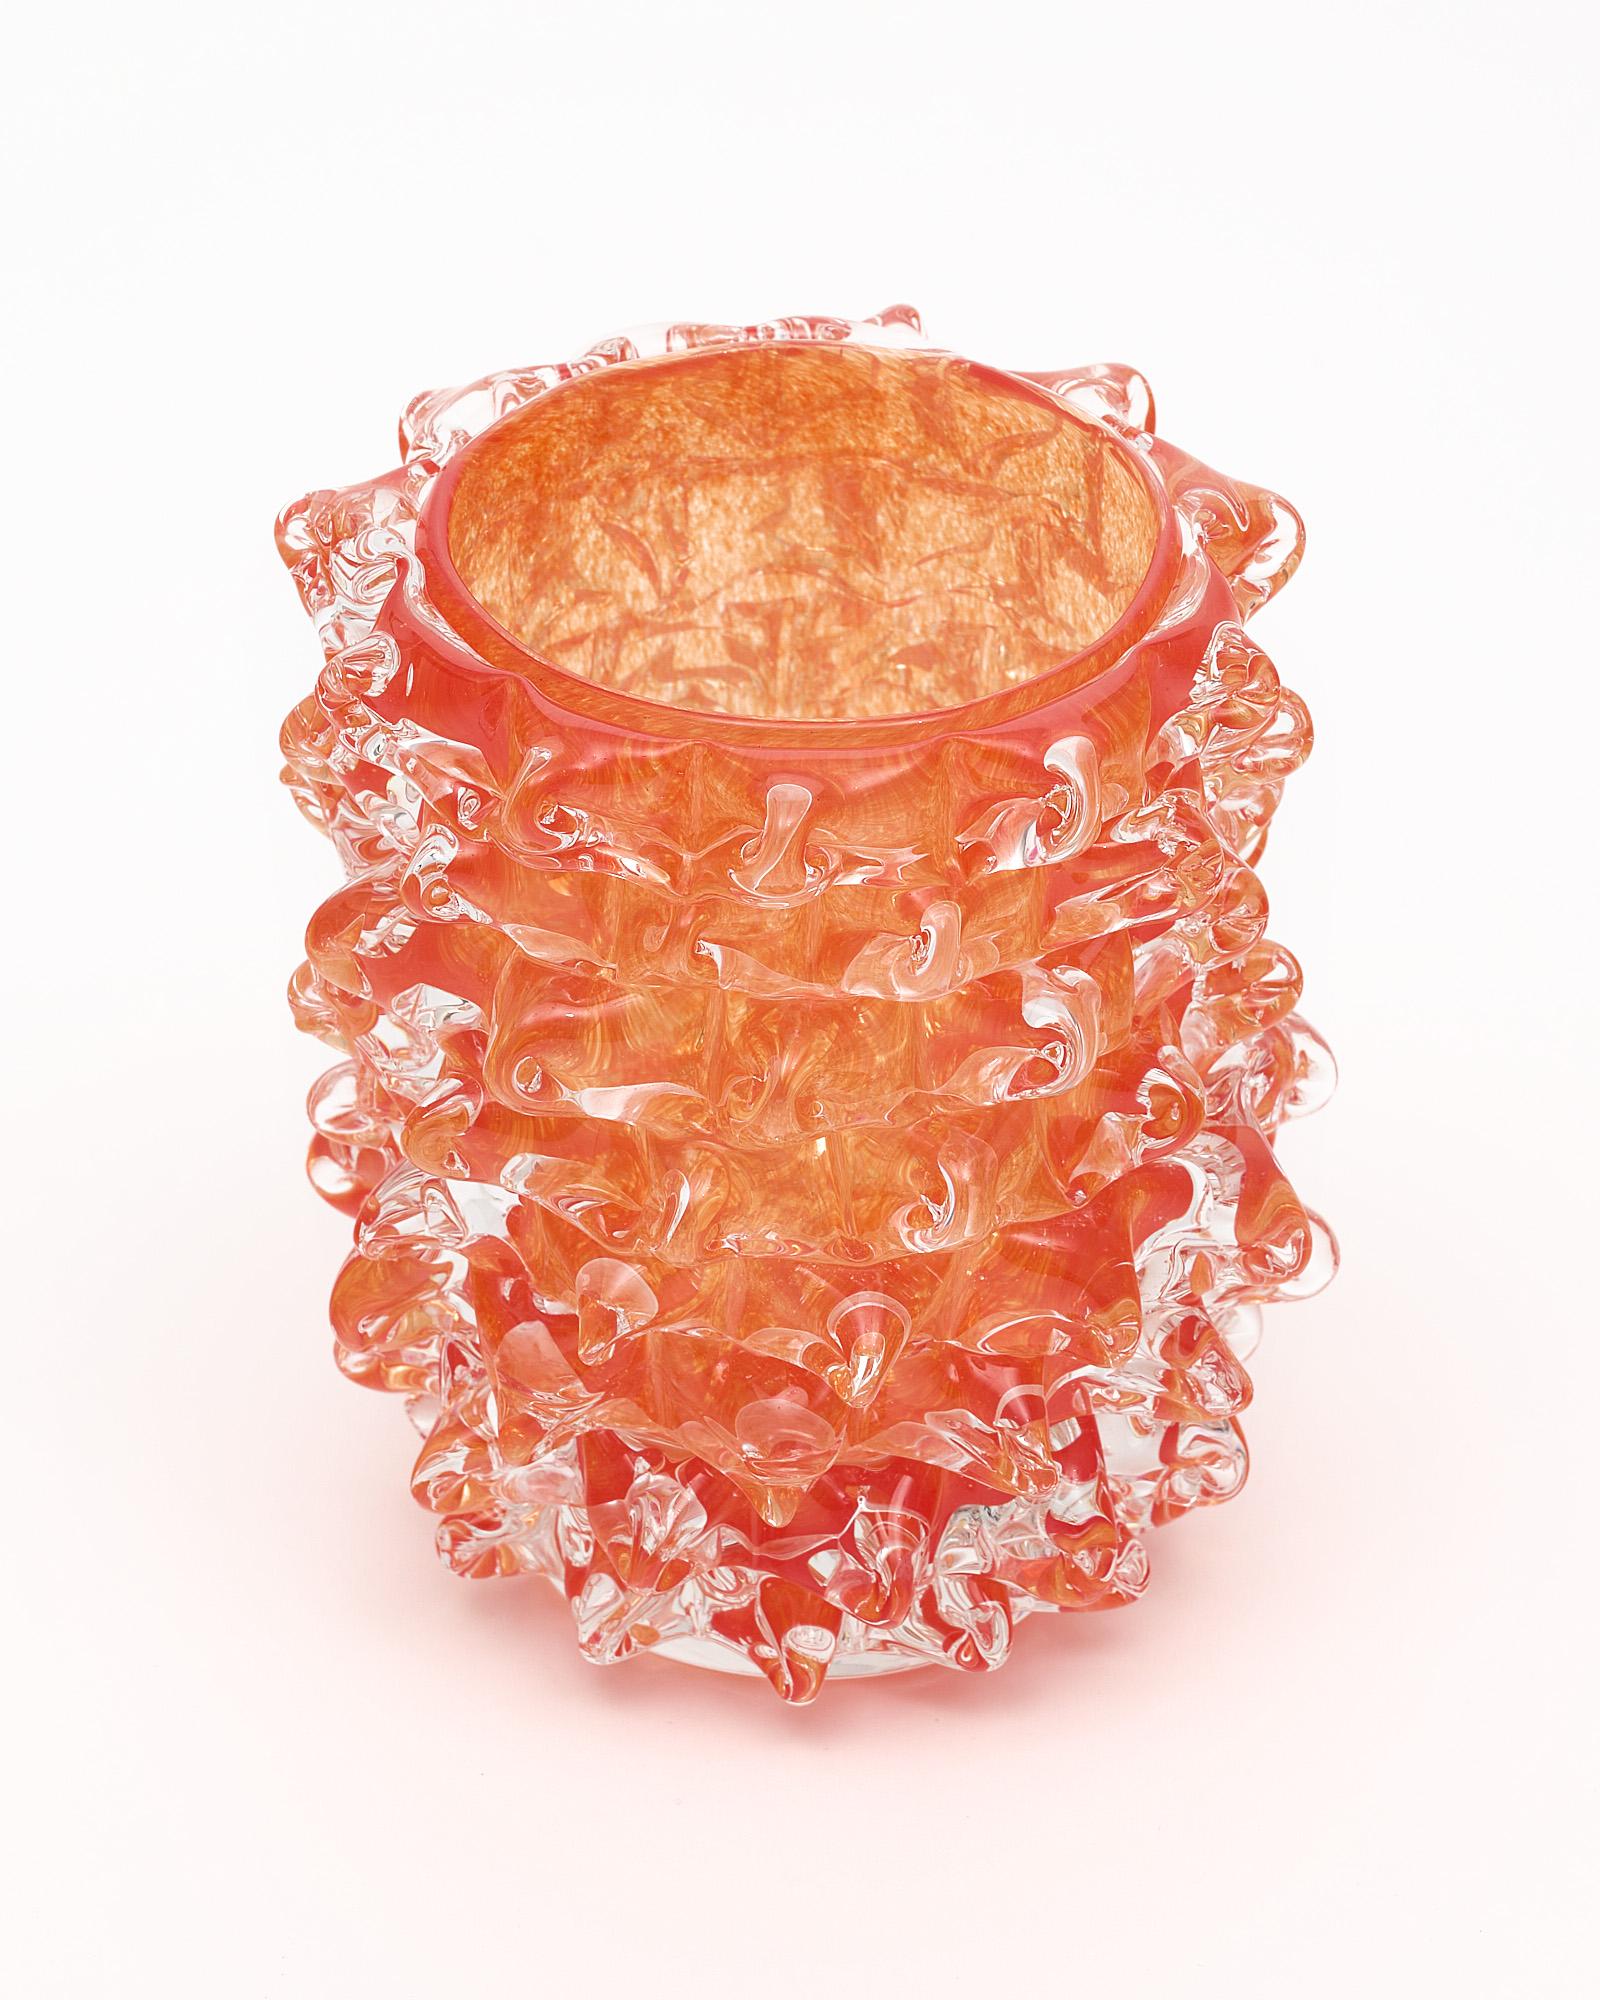 Murano glass vase, Italian, from the island of Murano and crafted in the manner of Barovier. This hand-blown piece has a striking orange color and is made with the “rostrate” technique.